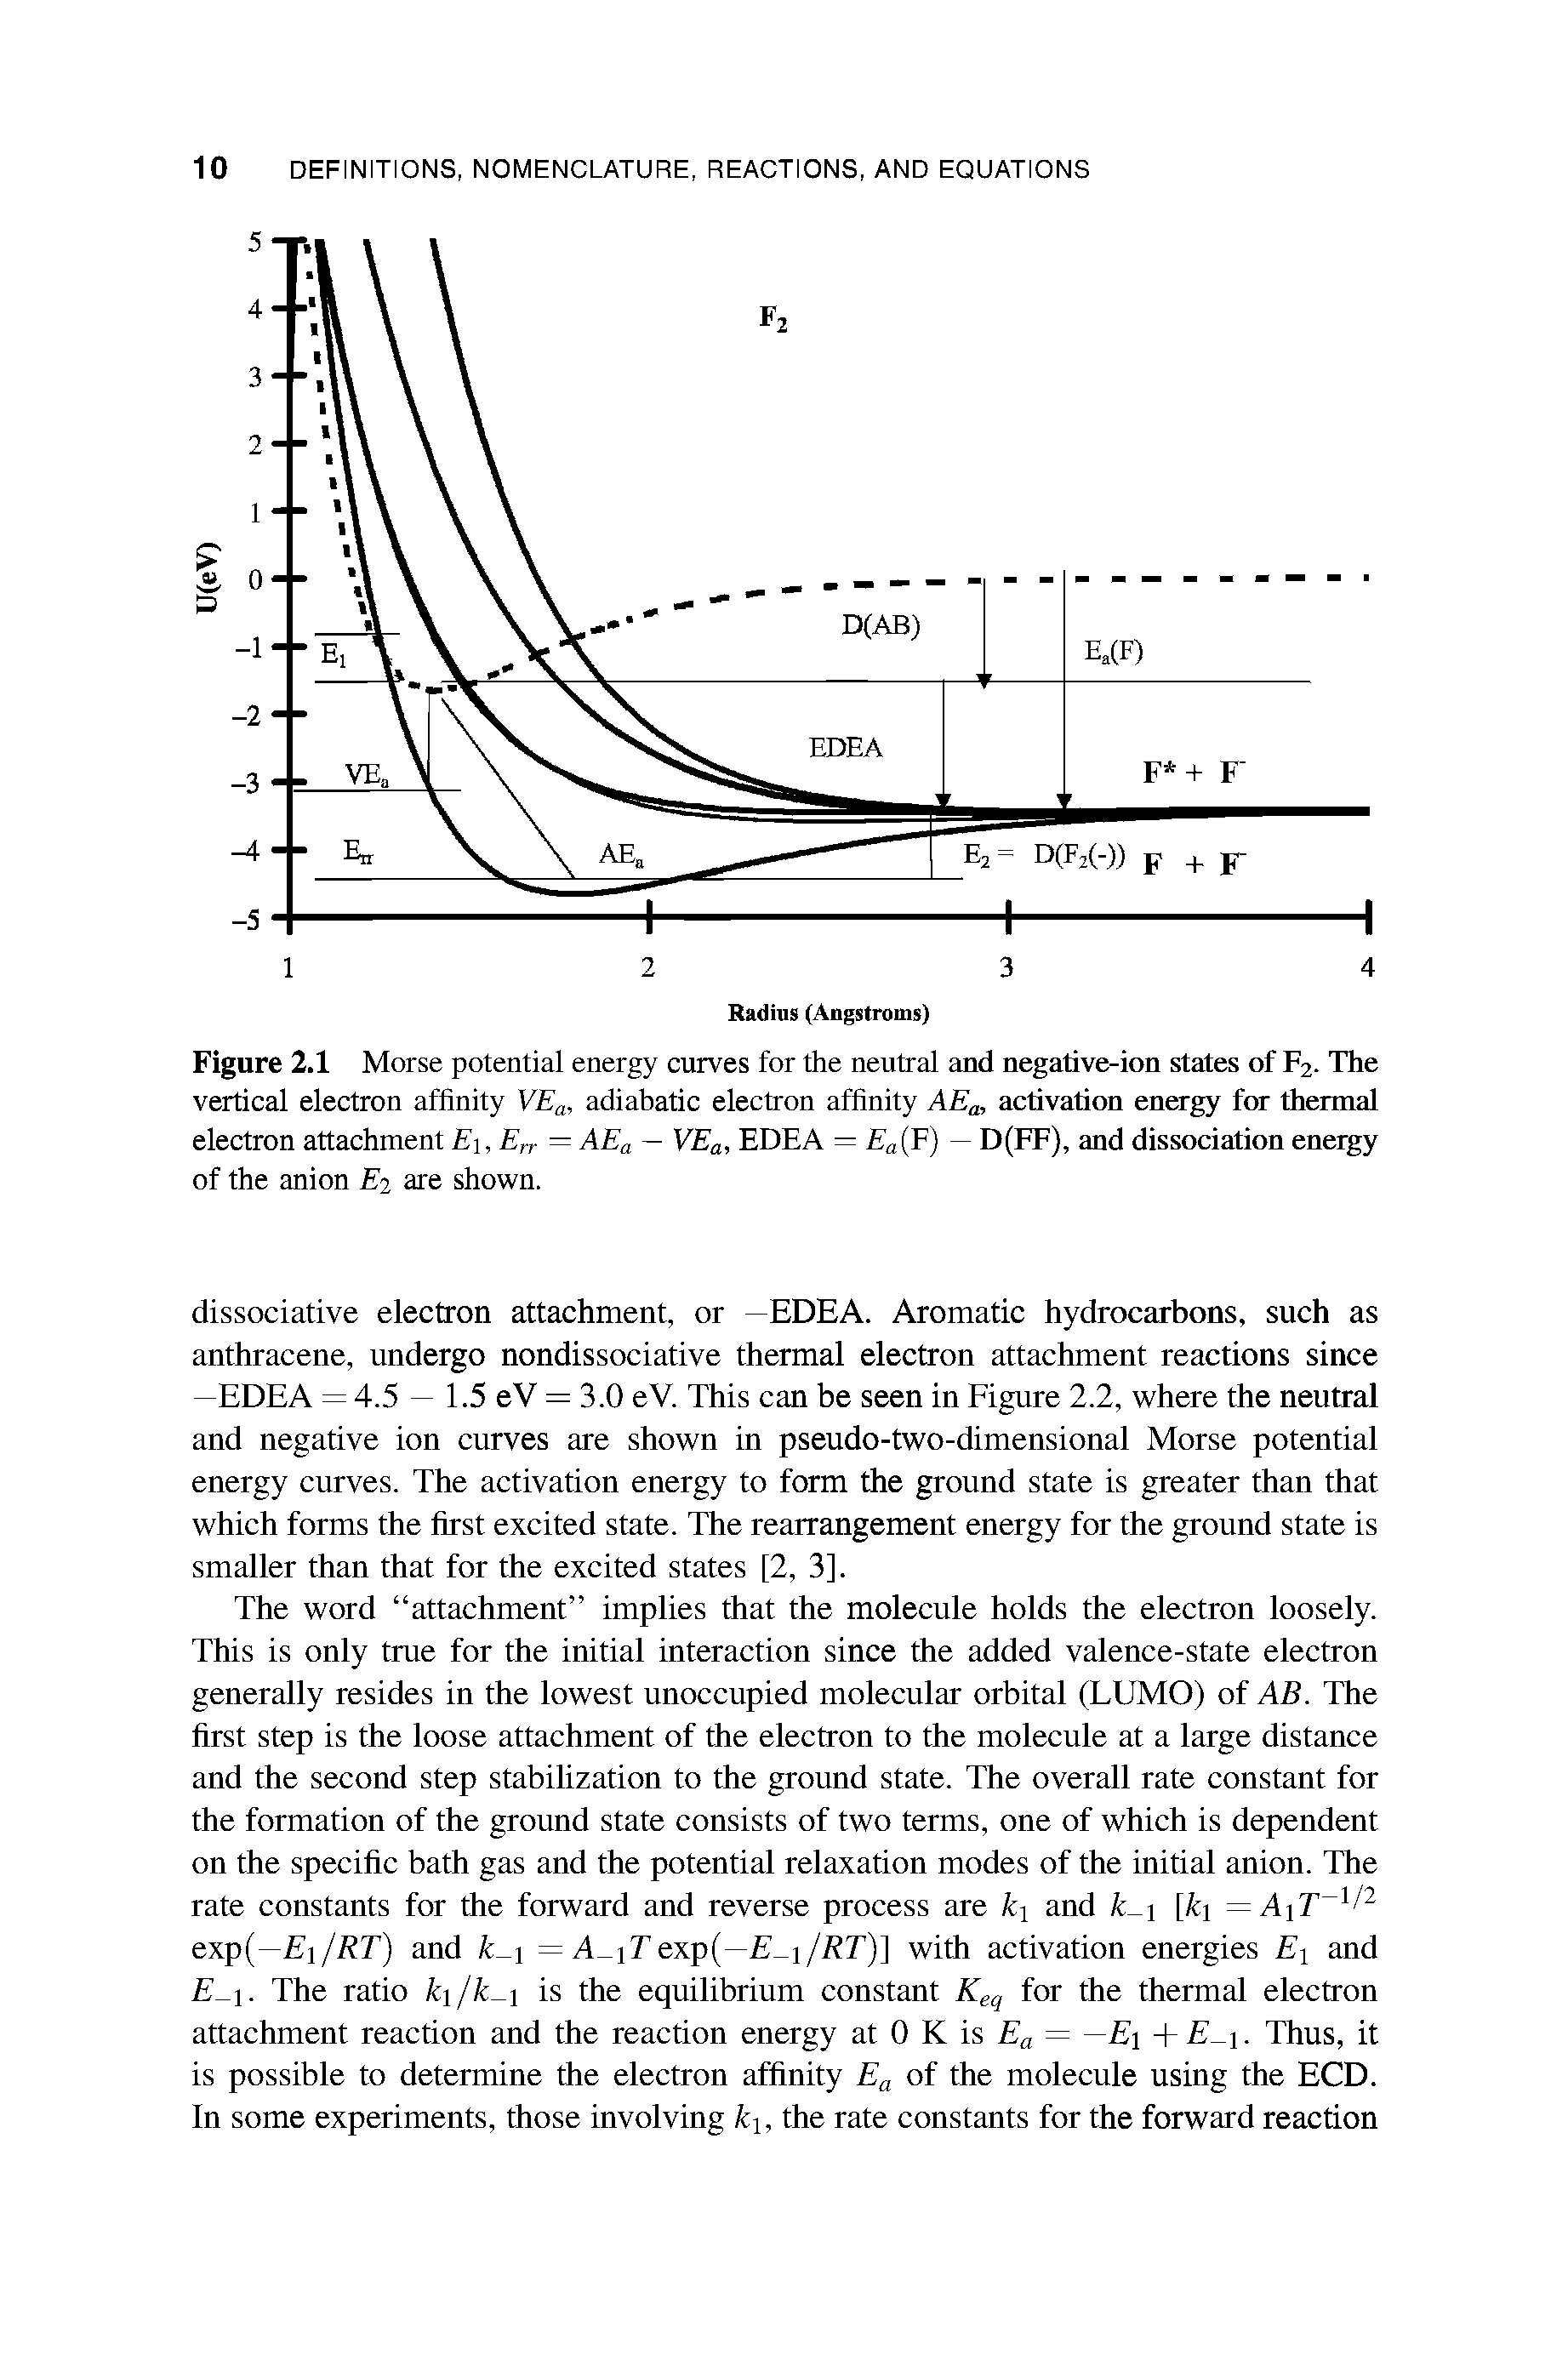 Figure 2.1 Morse potential energy curves for the neutral and negative-ion states of F2. The vertical electron affinity VEa, adiabatic electron affinity AEa, activation energy for thermal electron attachment E, Err — AEa — VEa, EDEA — Ea(F) — D(FF), and dissociation energy of the anion Ez are shown.